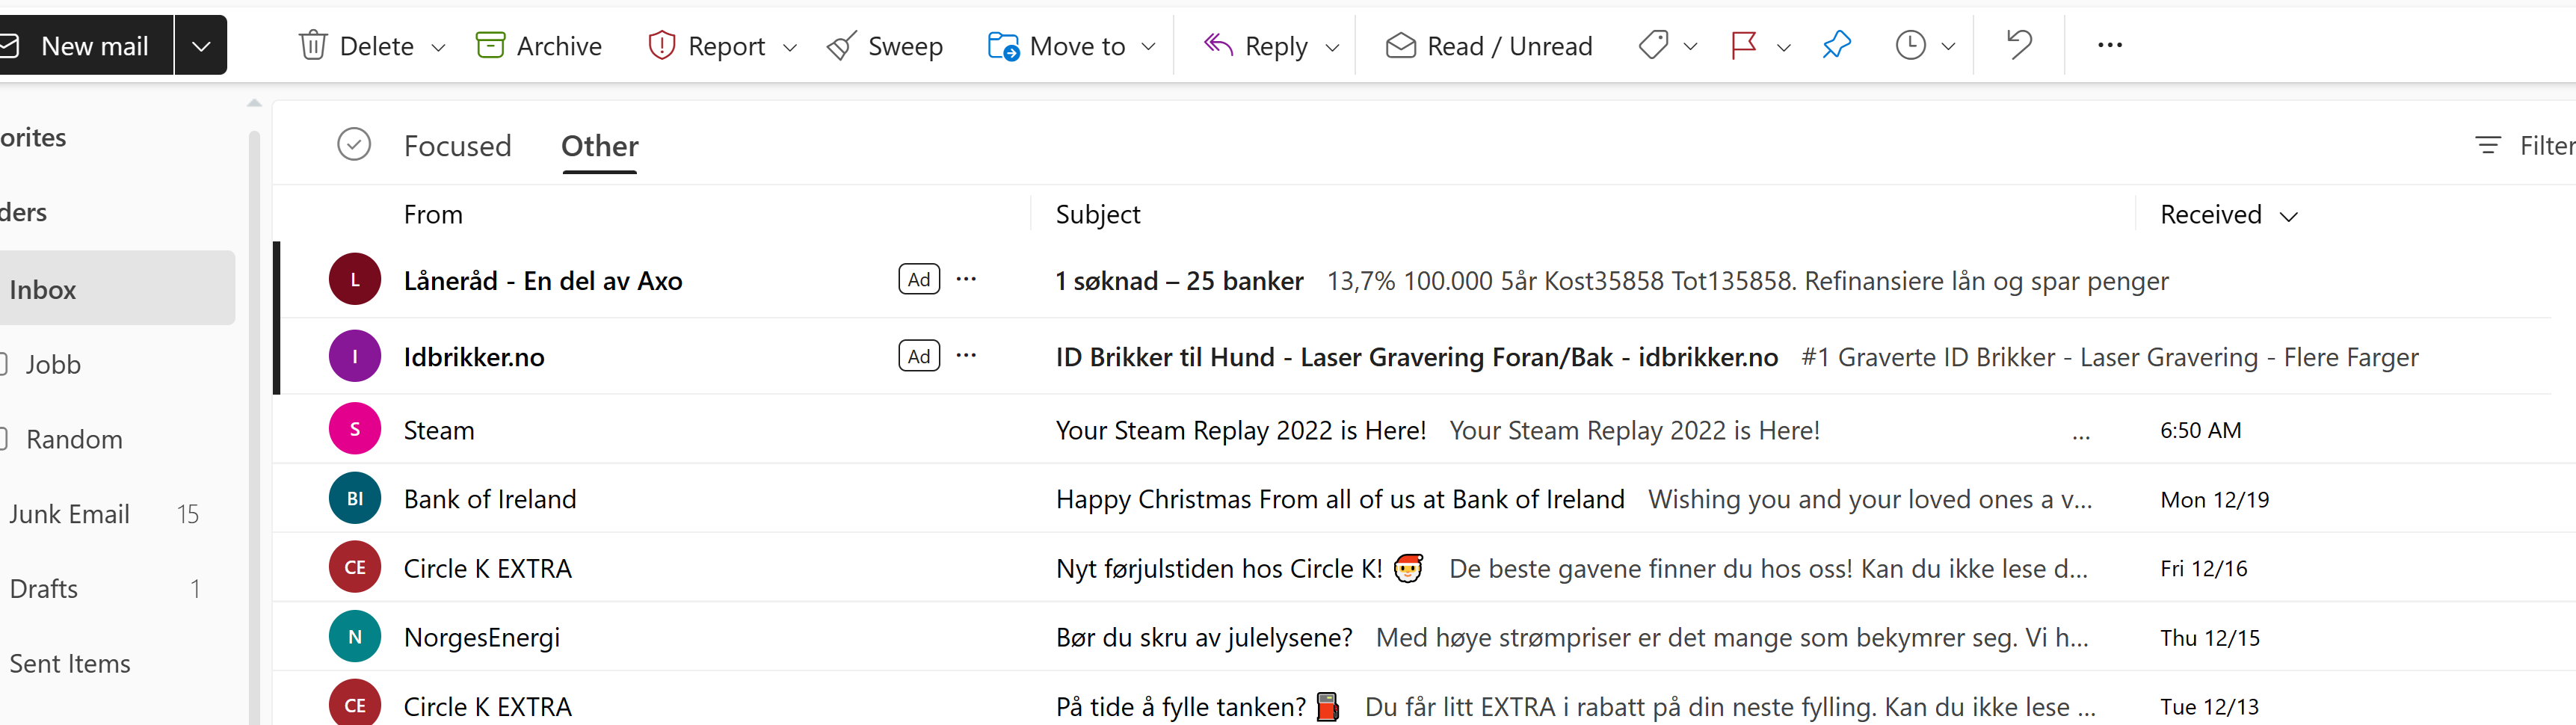 Screenshot from an Outlook inbox with ads disguised as emails.